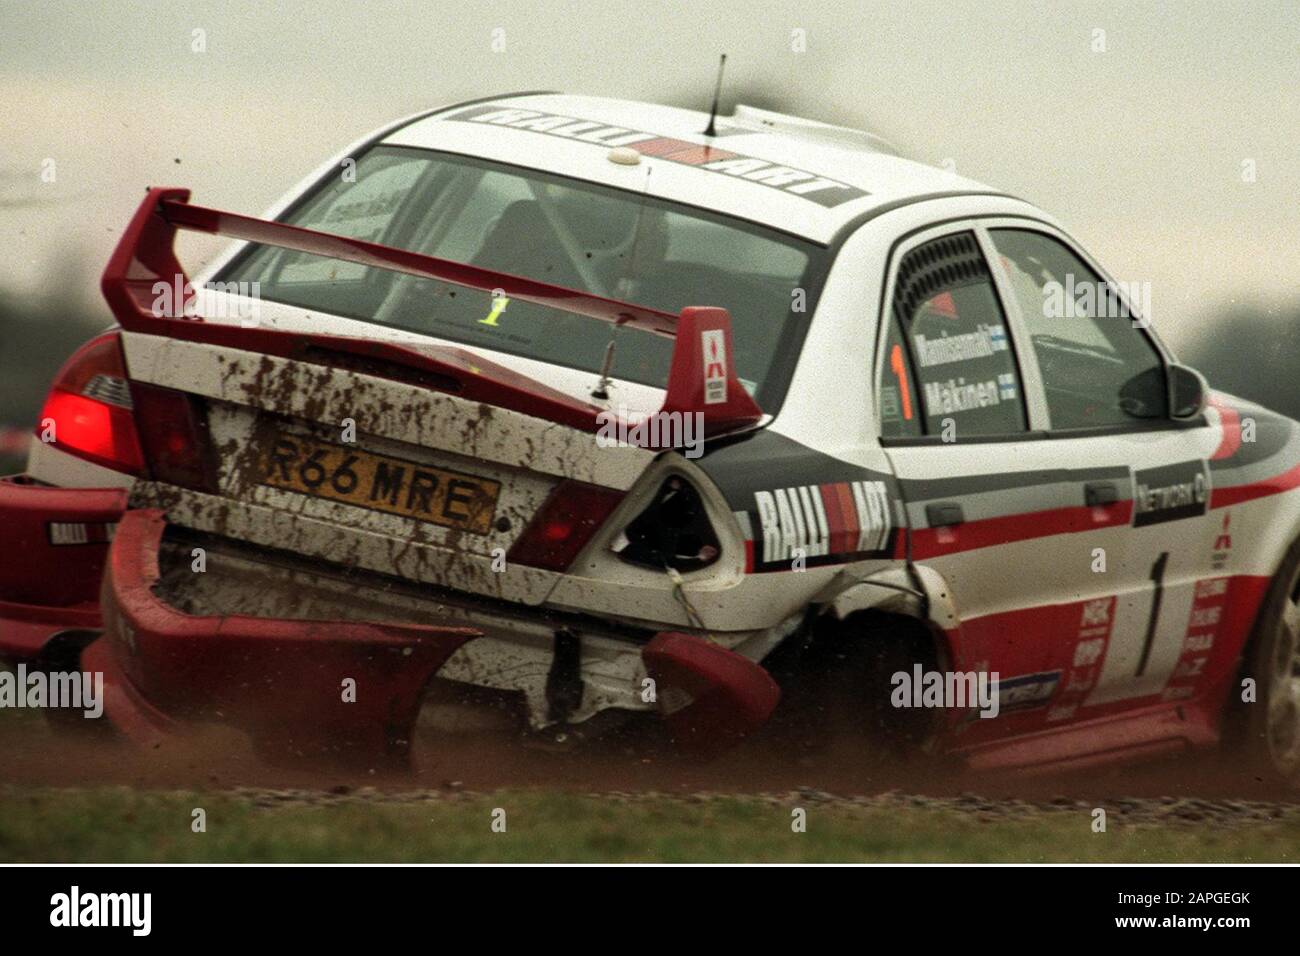 Rally driver Tommi Makinen after his crash on the Milbrook Proving Ground Super Special Stage in his Mitsubishi Rally Car during the 1998 Rally GB  Picture by Antony Thompson - Thousand Word Media, NO SALES, NO SYNDICATION. Contact for more information mob: 07775556610 web: www.thousandwordmedia.com email: antony@thousandwordmedia.com  The photographic copyright (© 2020) is exclusively retained by the works creator at all times and sales, syndication or offering the work for future publication to a third party without the photographer's knowledge or agreement is in breach of the Copyright Desi Stock Photo